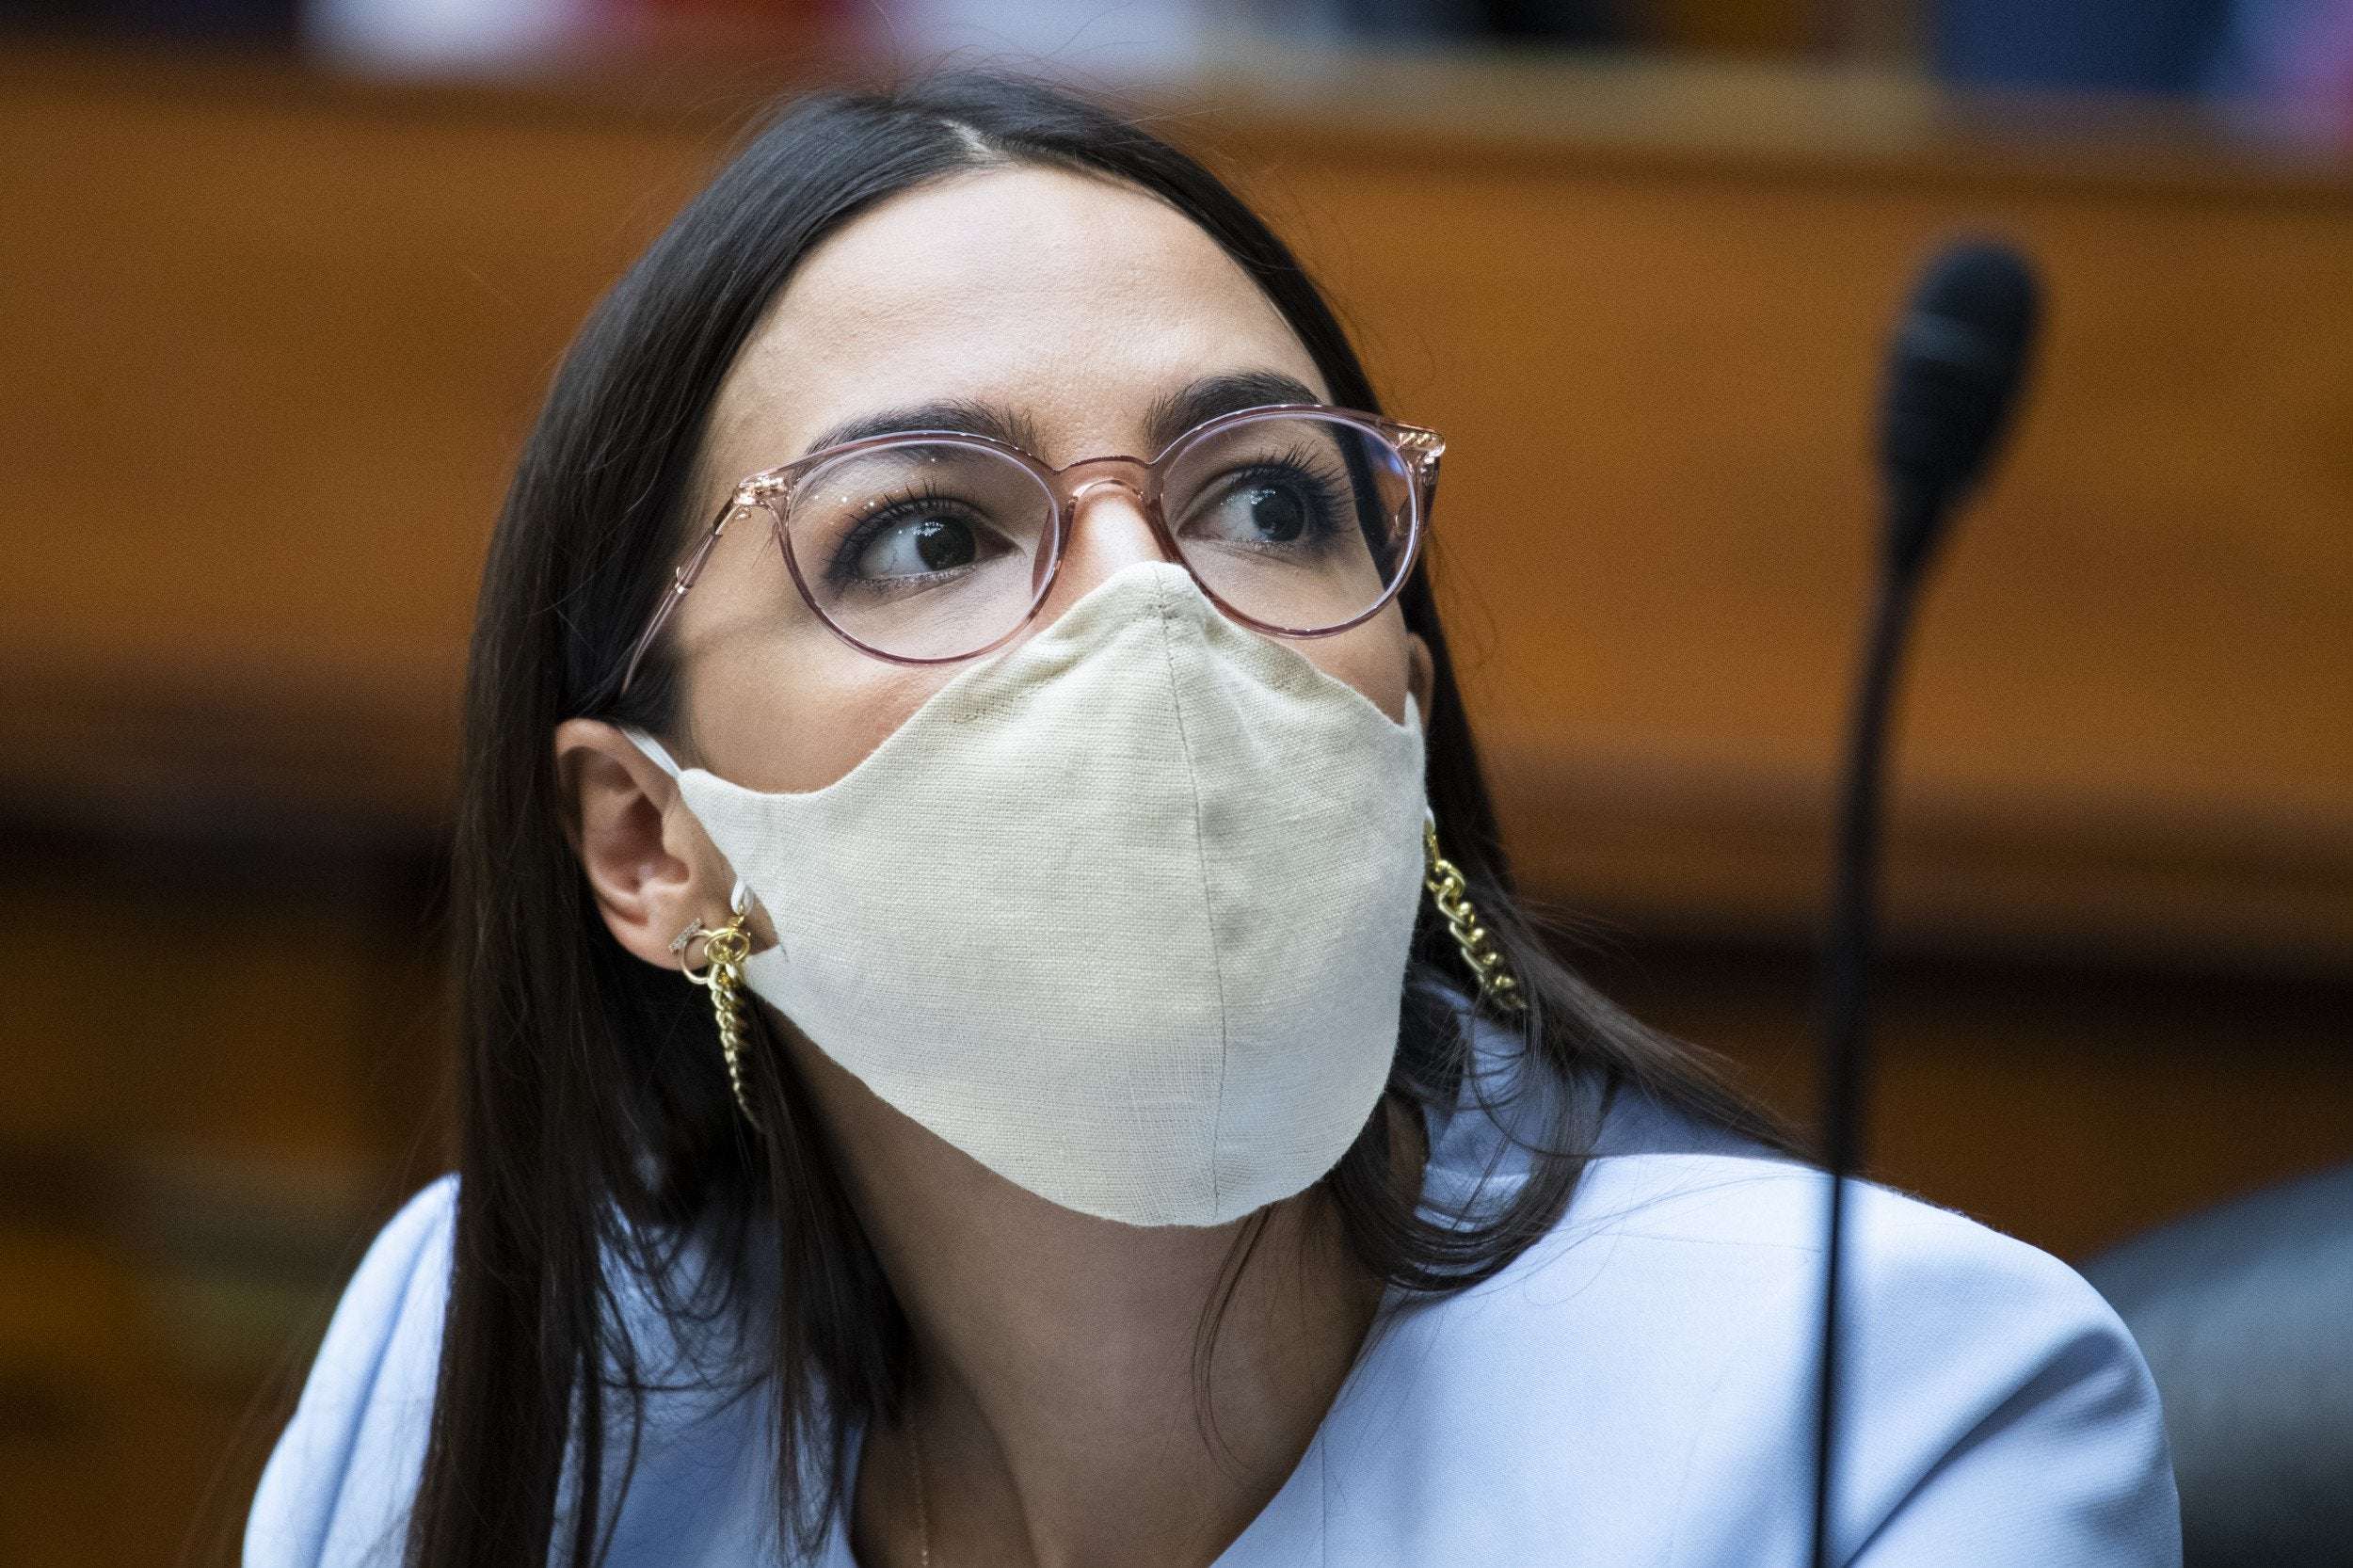 image for AOC Says U.S. 'Must Atone' for Rights Violations After Whistleblower's ICE Hysterectomy Claims